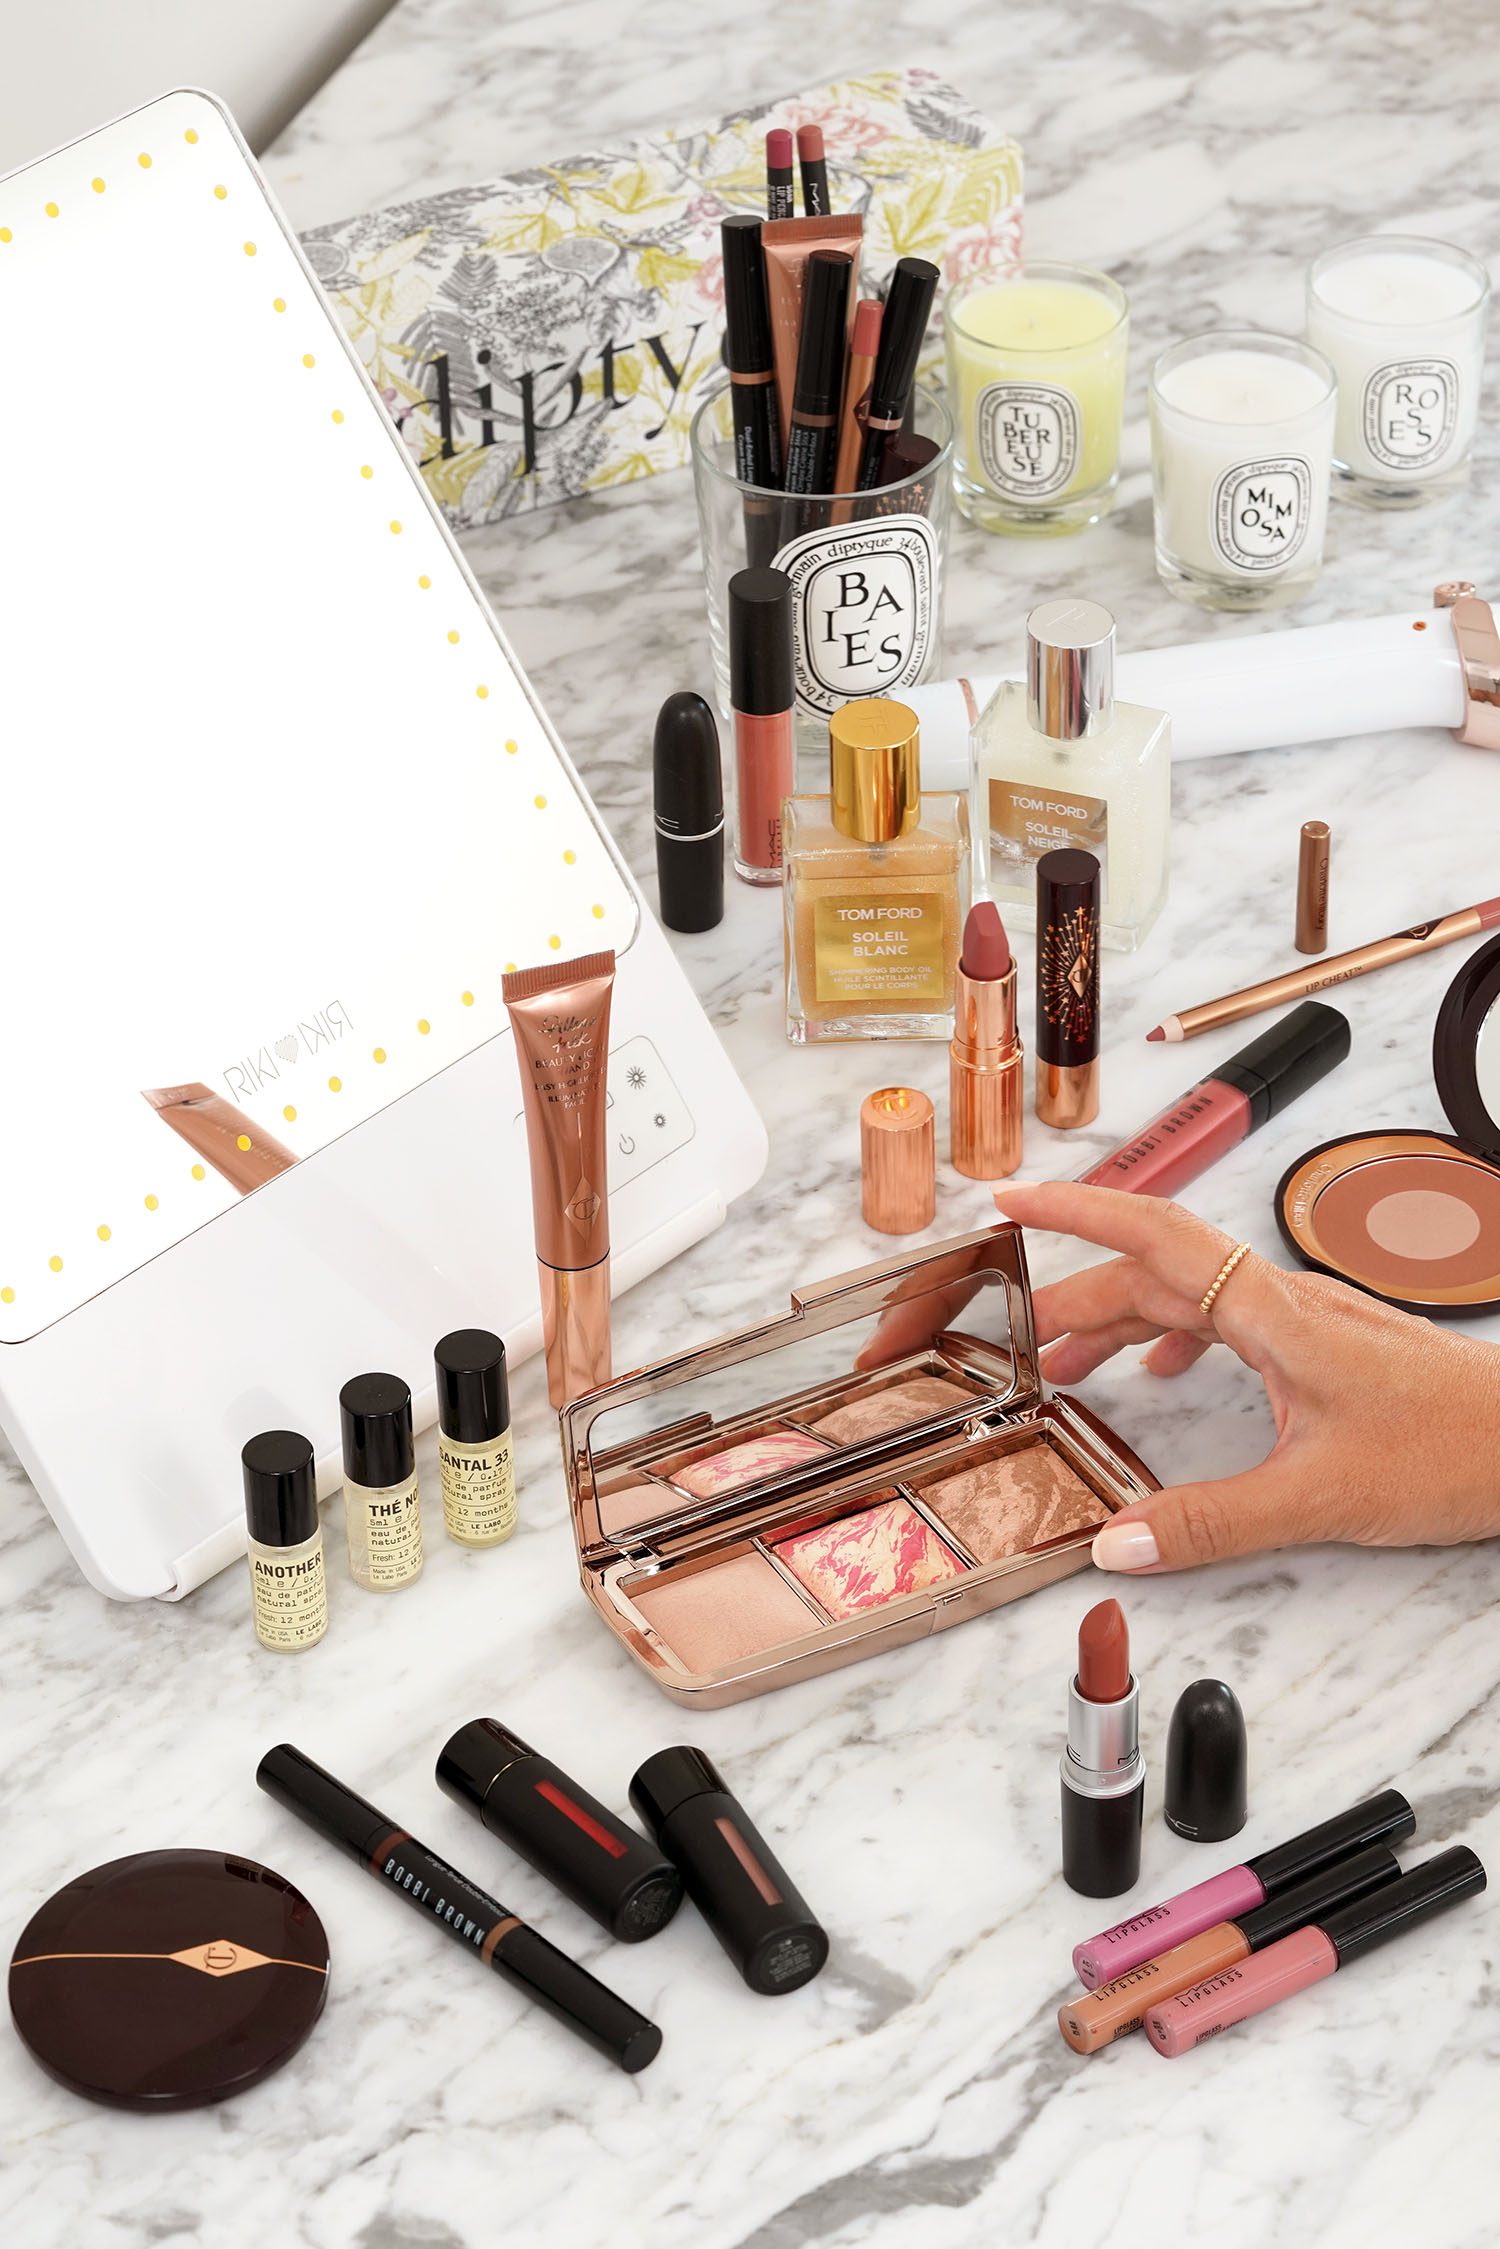 Nordstrom Anniversary Sale Beauty Haul - The Beauty Look Book